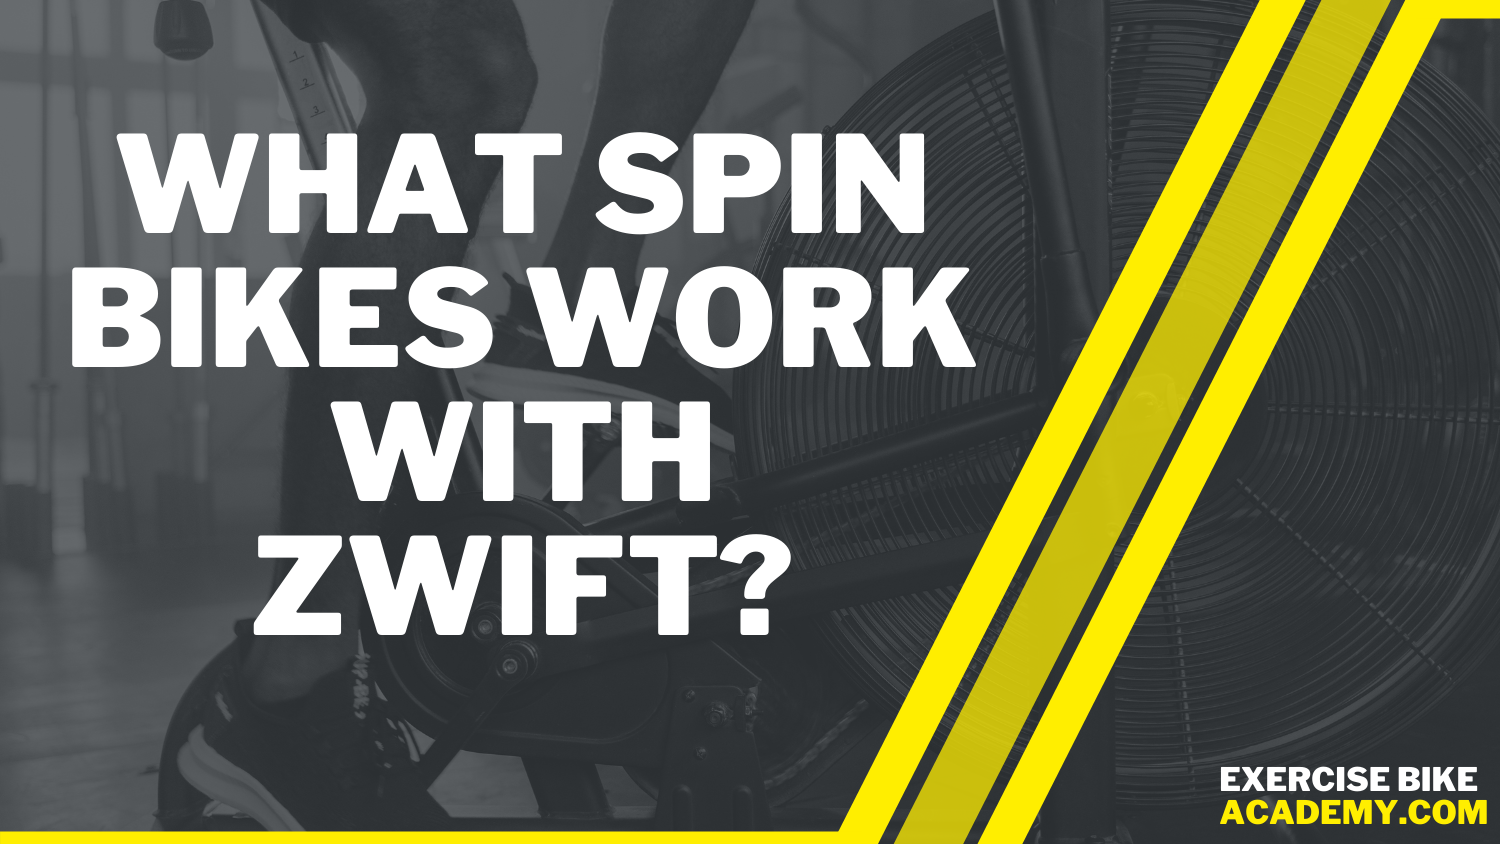 What Spin Bikes Work With Zwift: Top 9 Bikes to Use With Zwift App